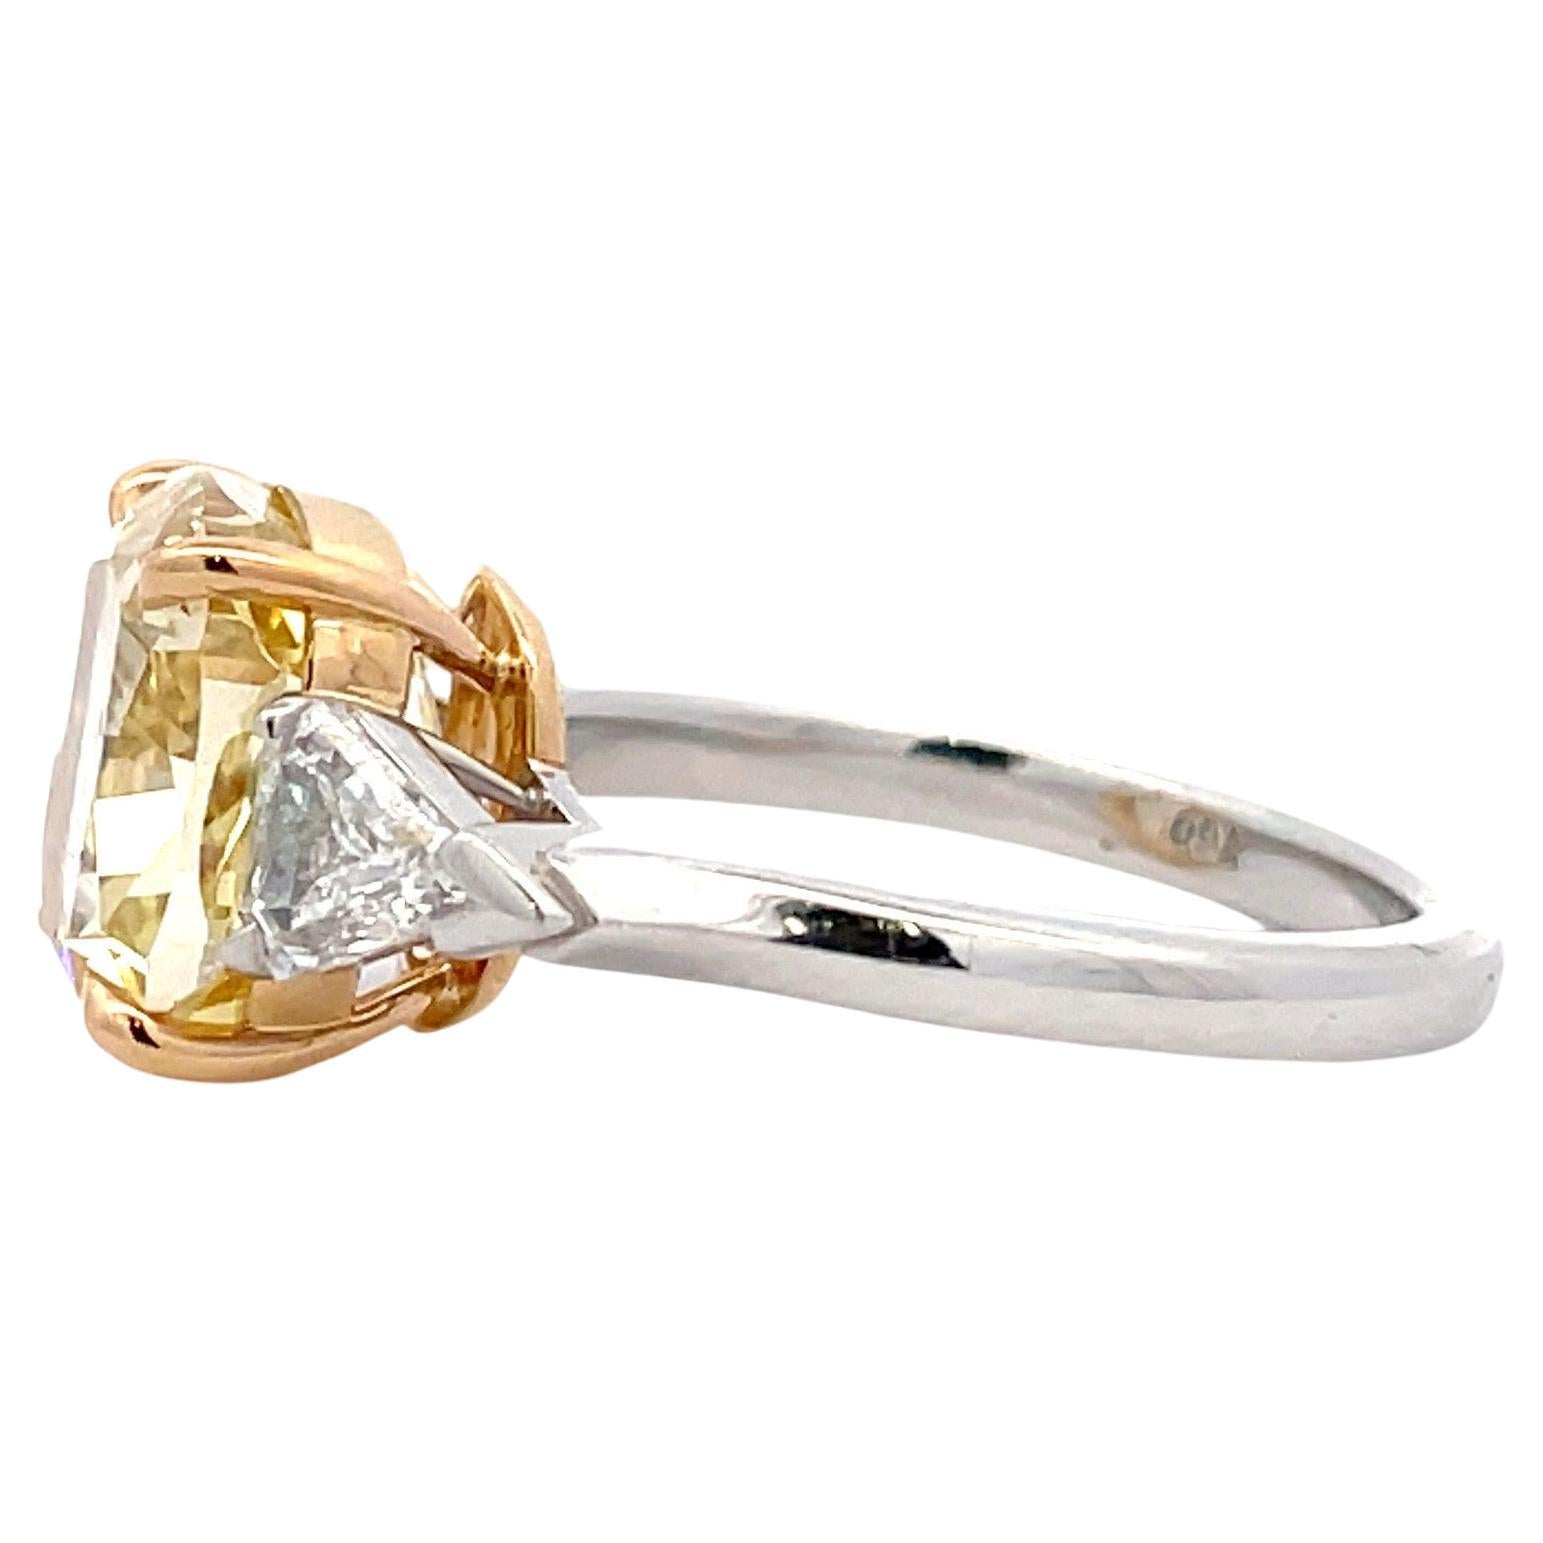 Three stone ring featuring one GIA Certified Fancy Brownish Yellow Cushion, 5.67 Carats, VVS1 Clarity flanked with two Kite diamonds weighing 0.67 Carats, in Platinum & 18 Karat Yellow Gold.

Diamonds Quality
Color E 
Clarity VS

